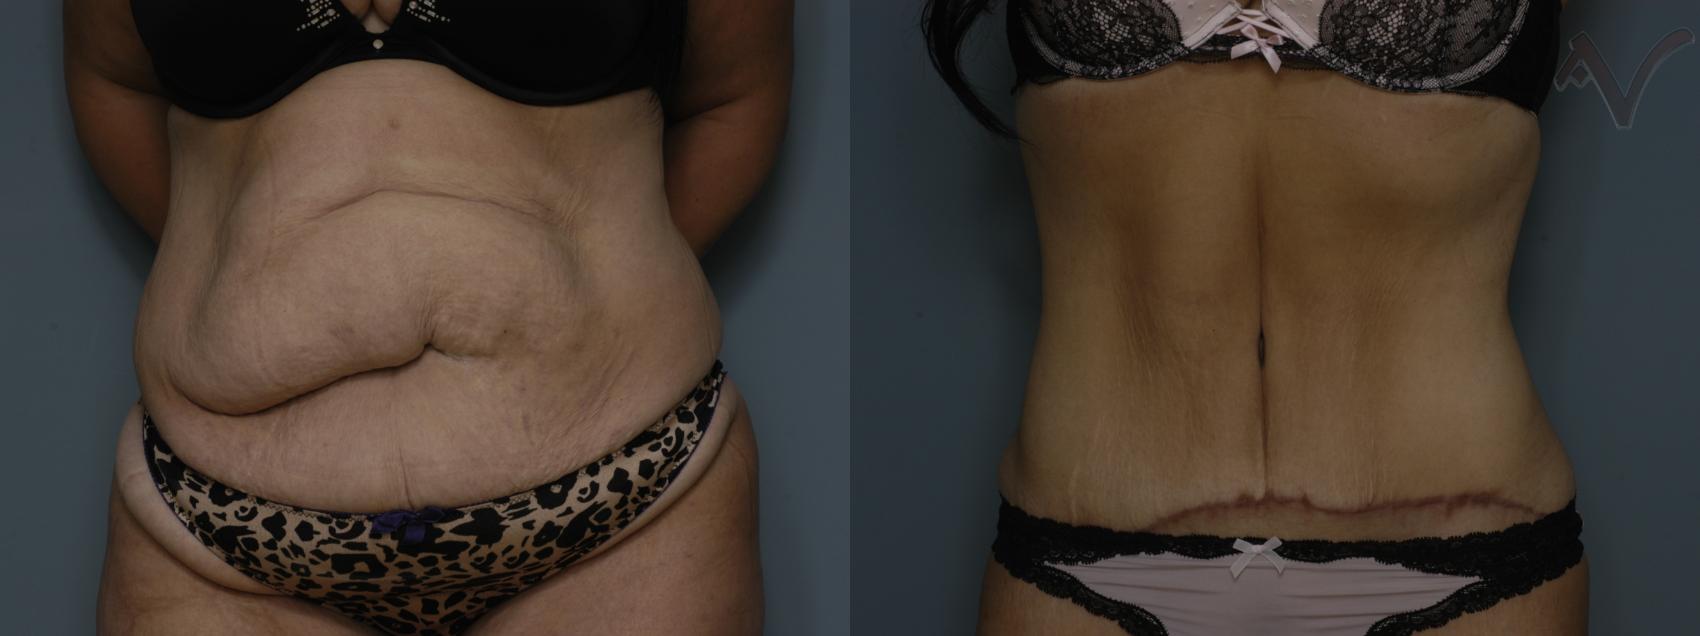 Before & After Abdominoplasty after Massive Weight Loss Case 58 Front View in Burbank, CA